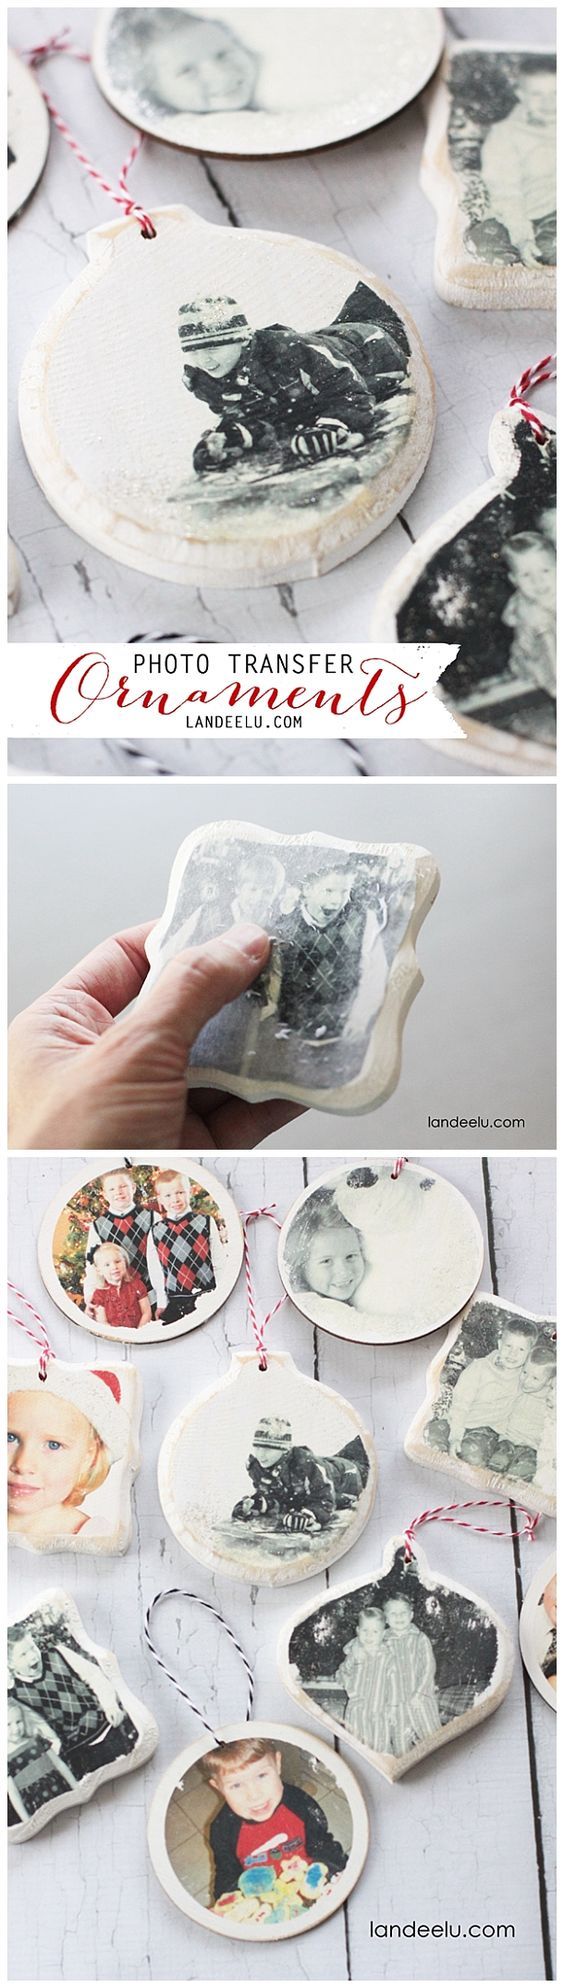 Ideas for Photo Transfer Projects